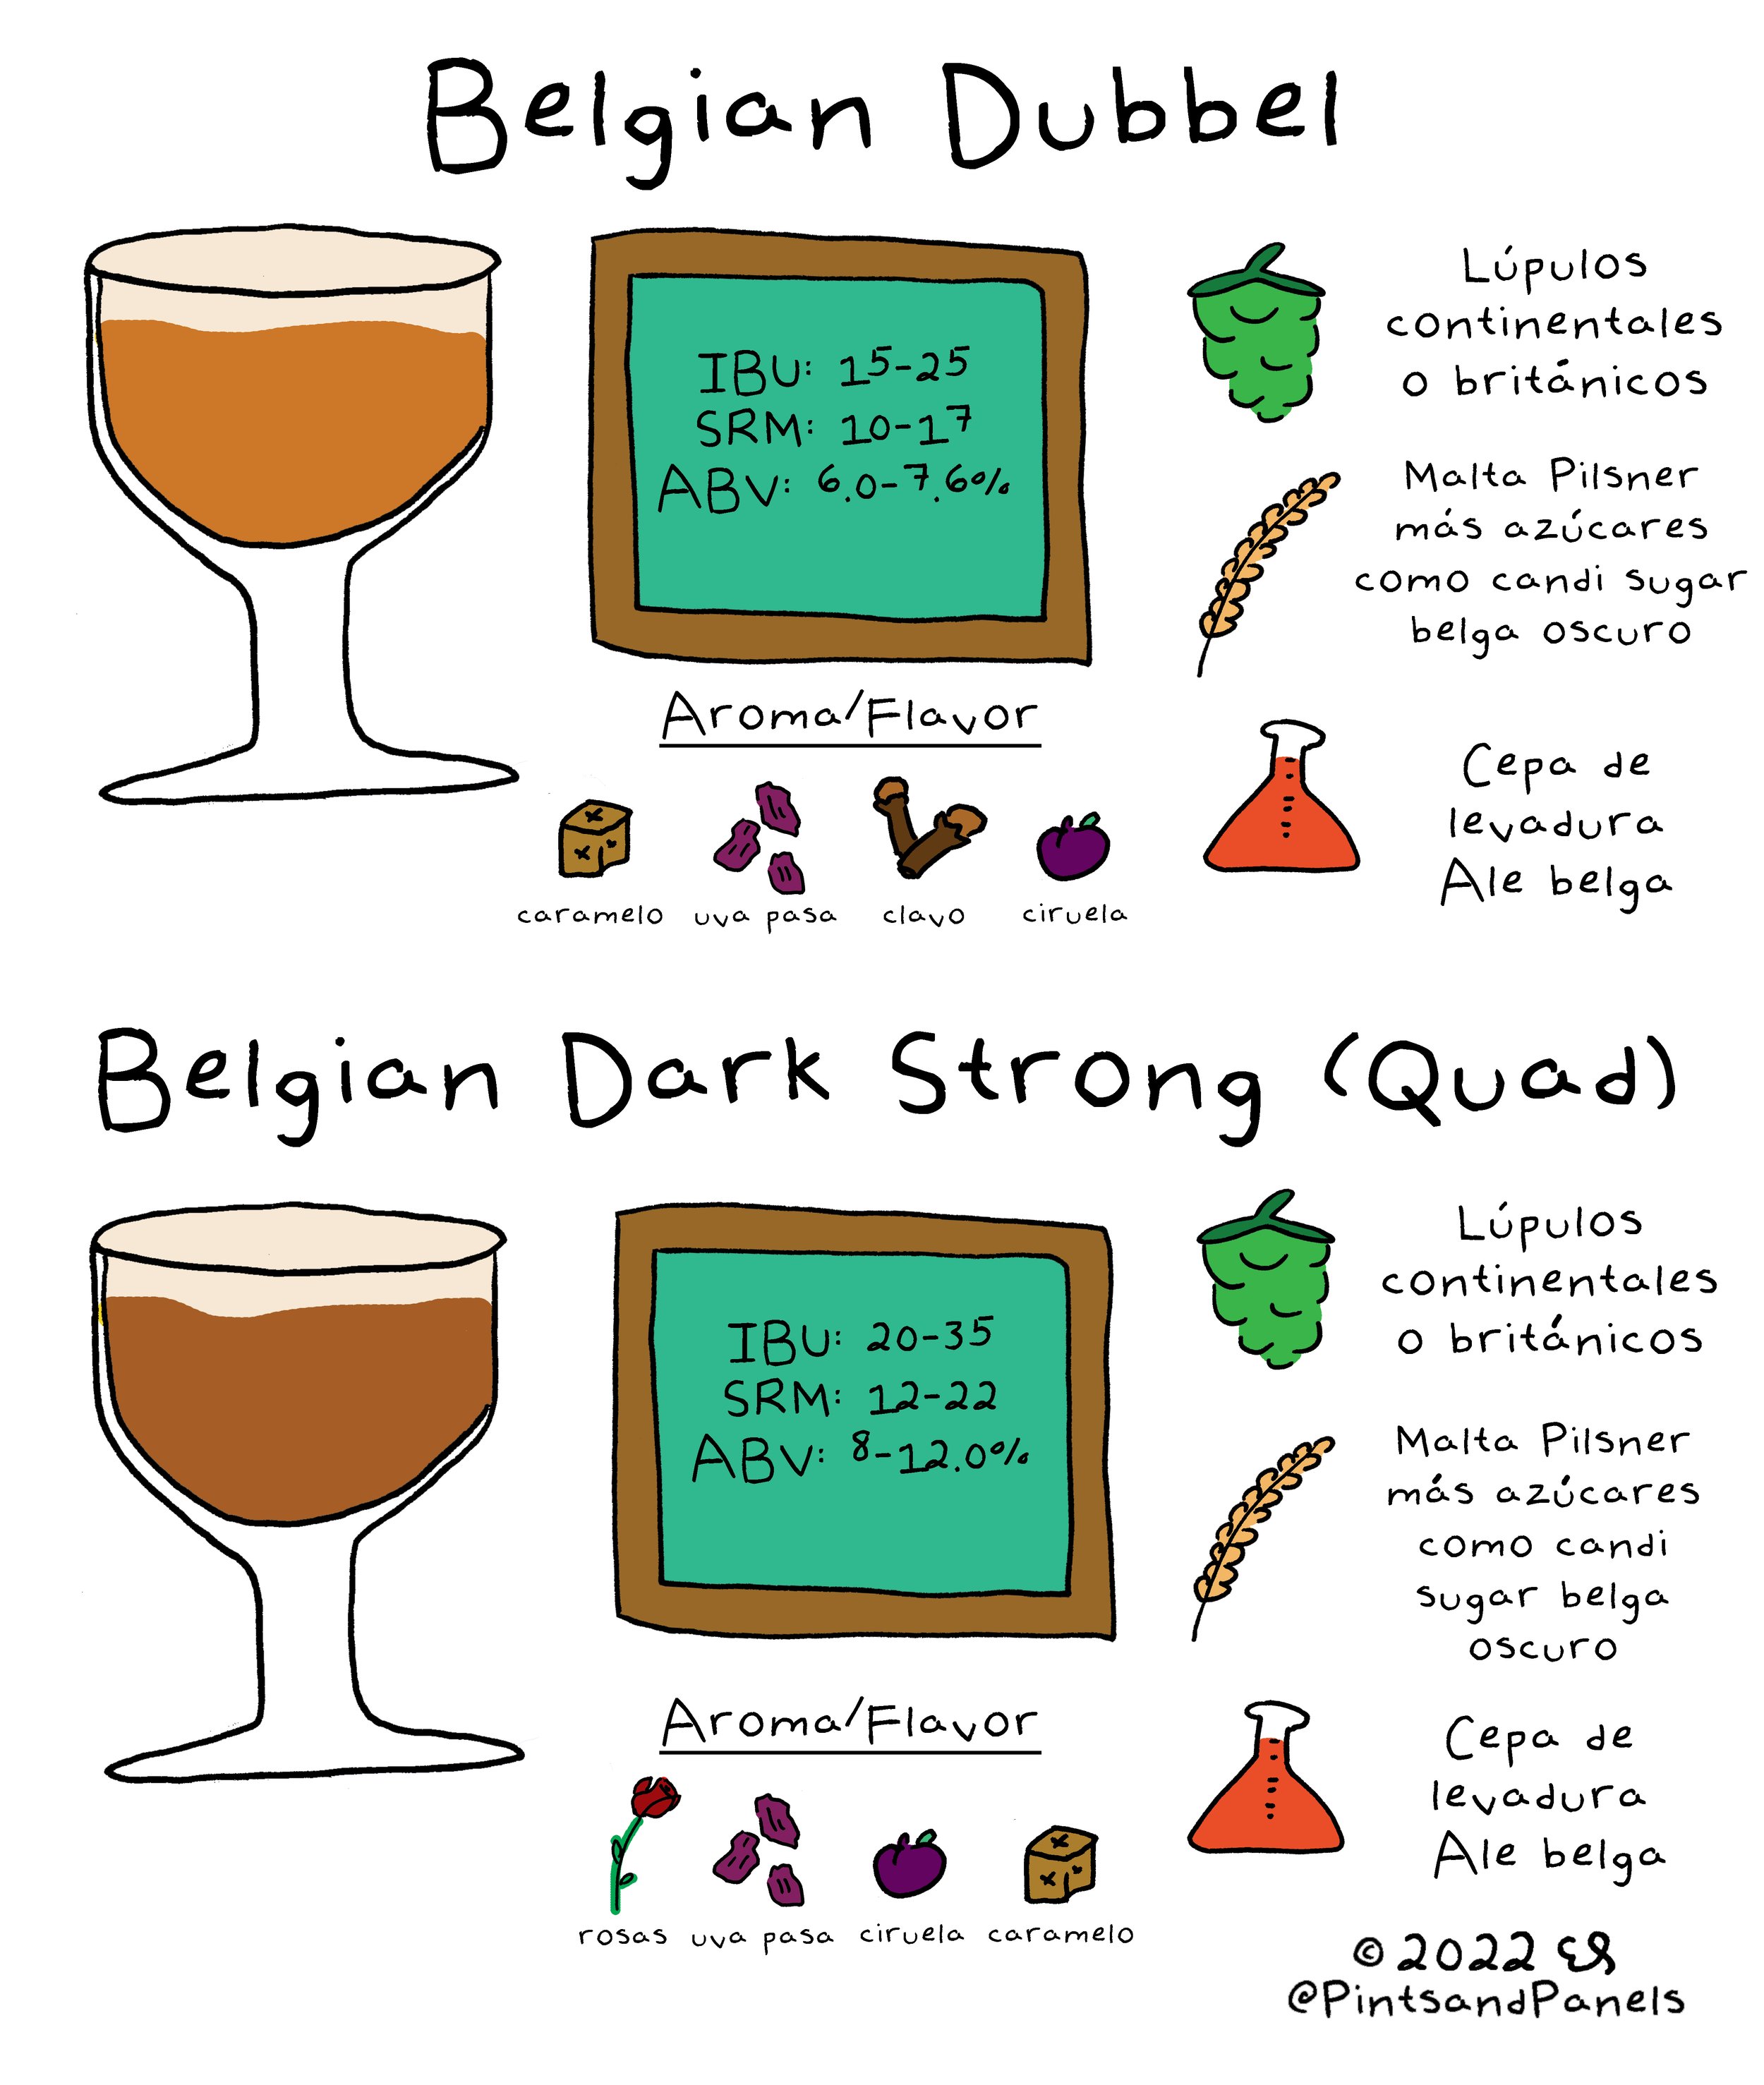 Diferencia entre Dubbel y Belgian Dark Strong (Quad) — Pints and Panels